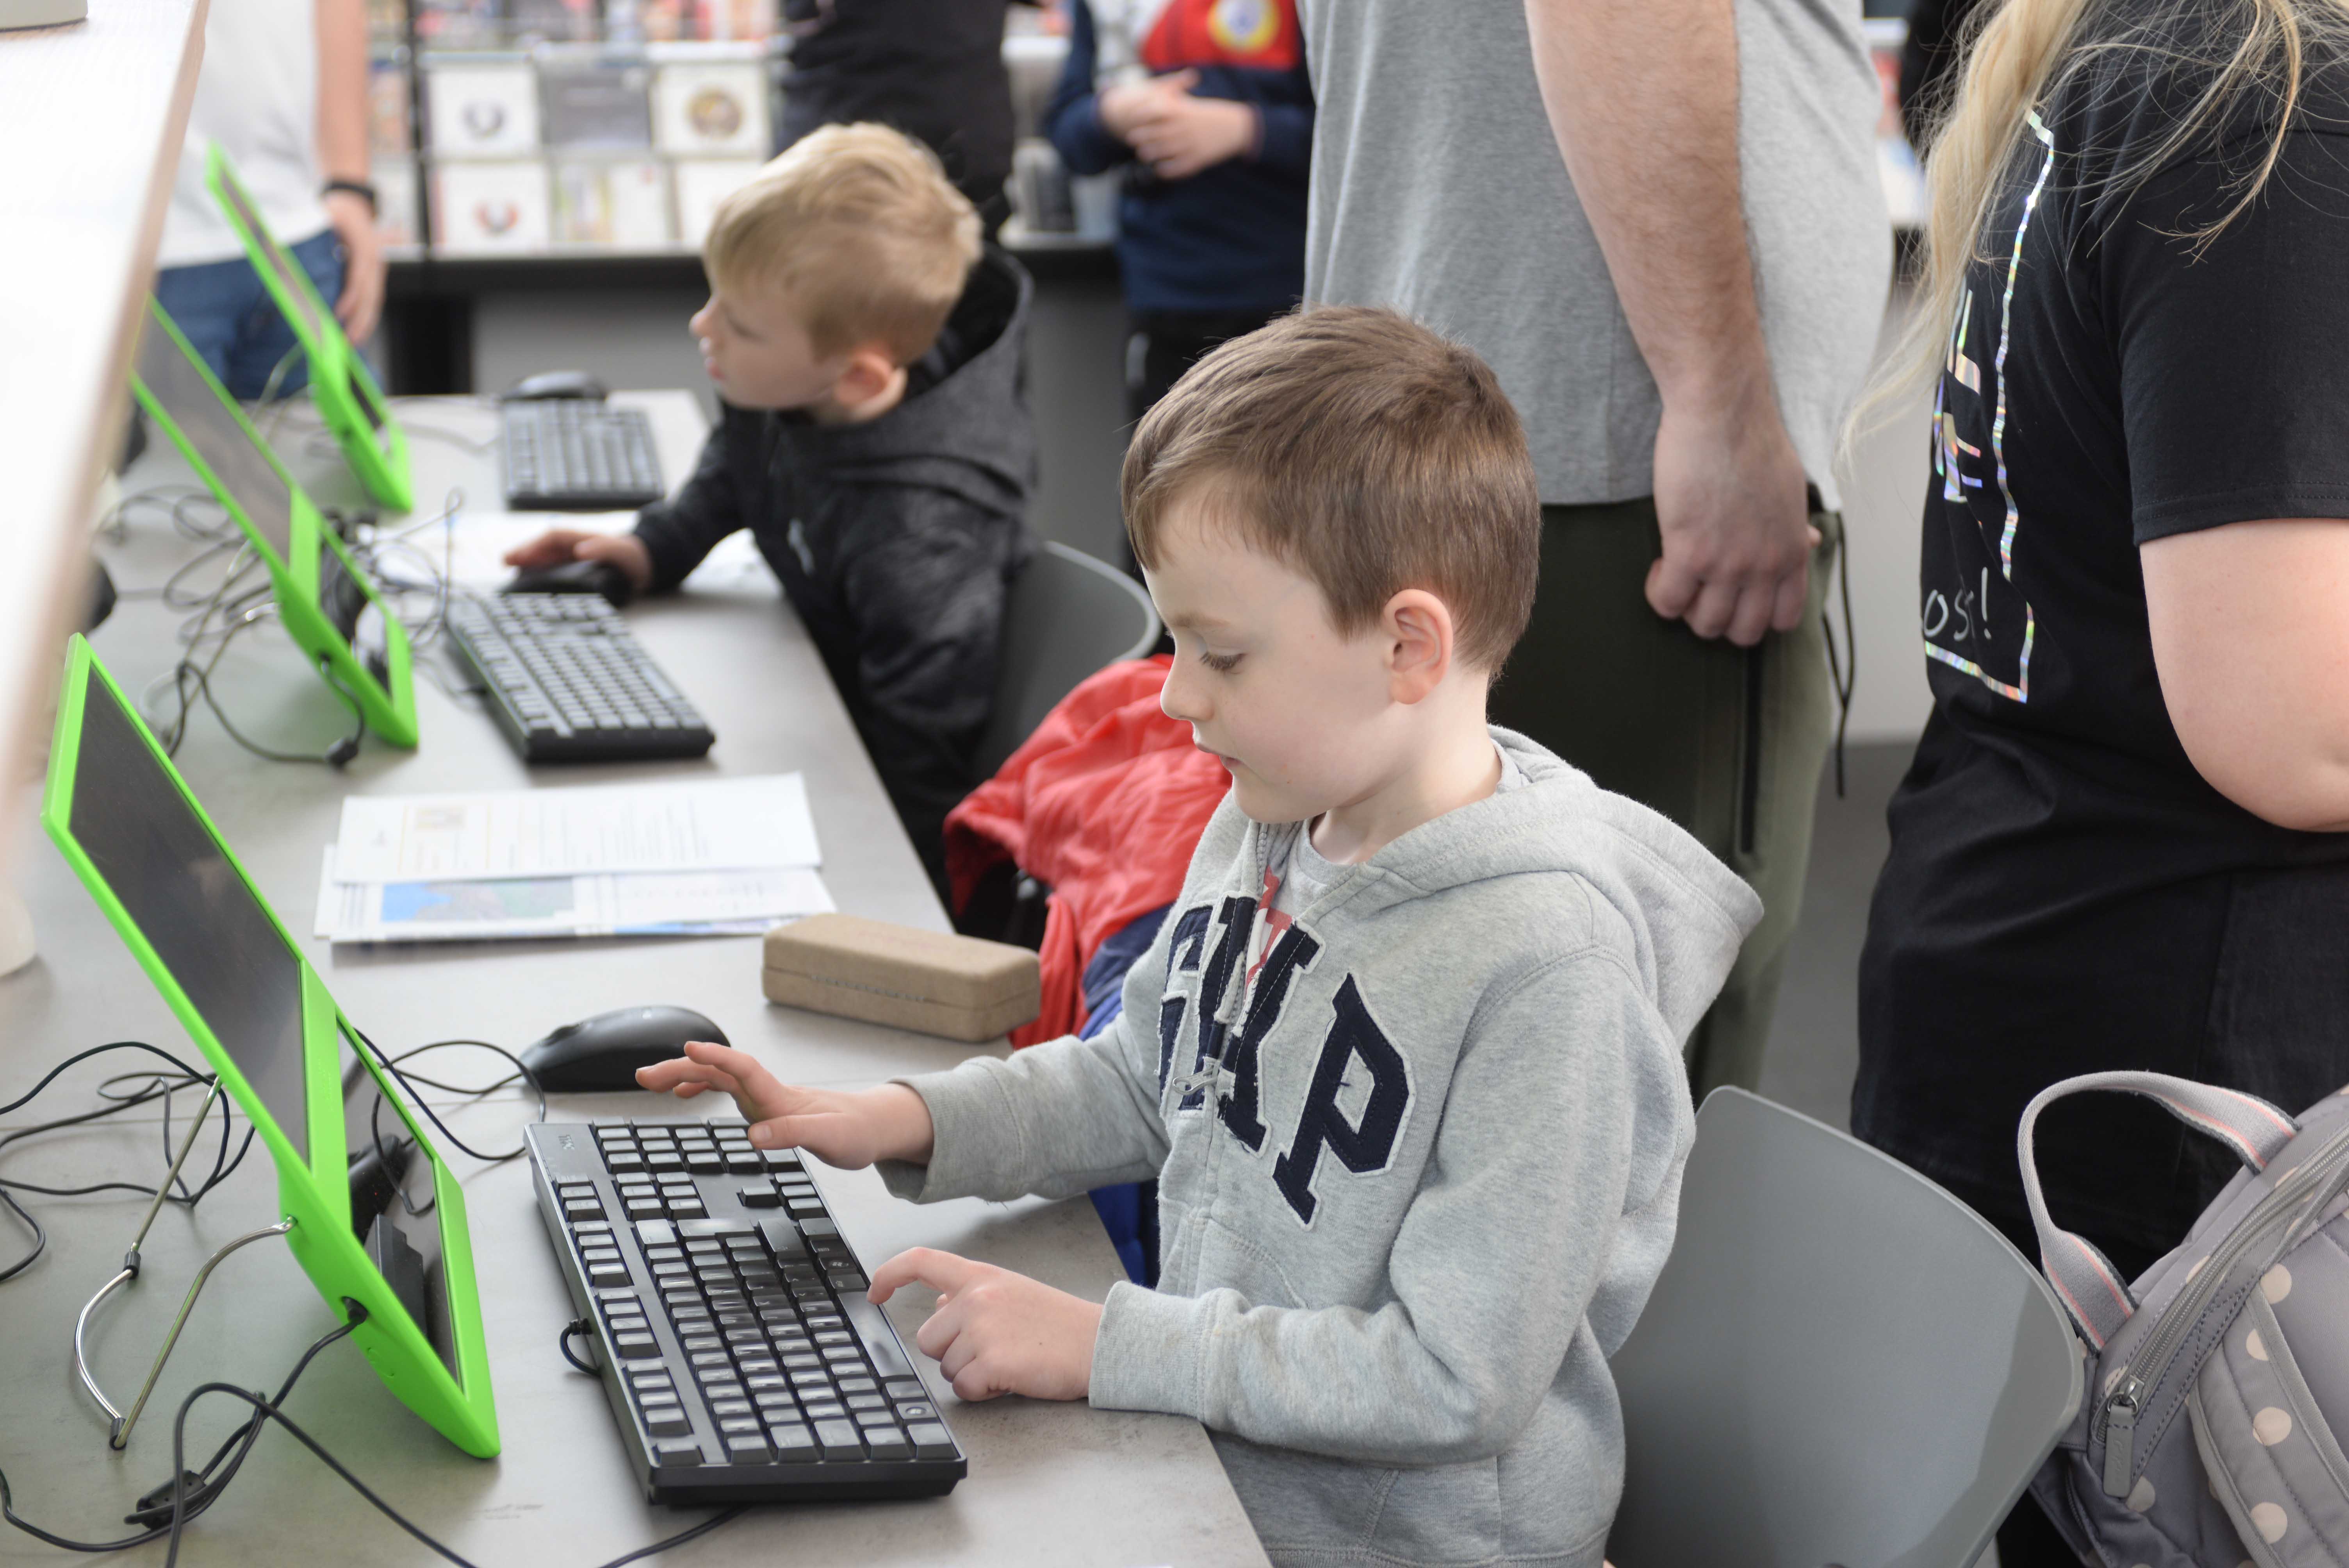 Young children learn to code